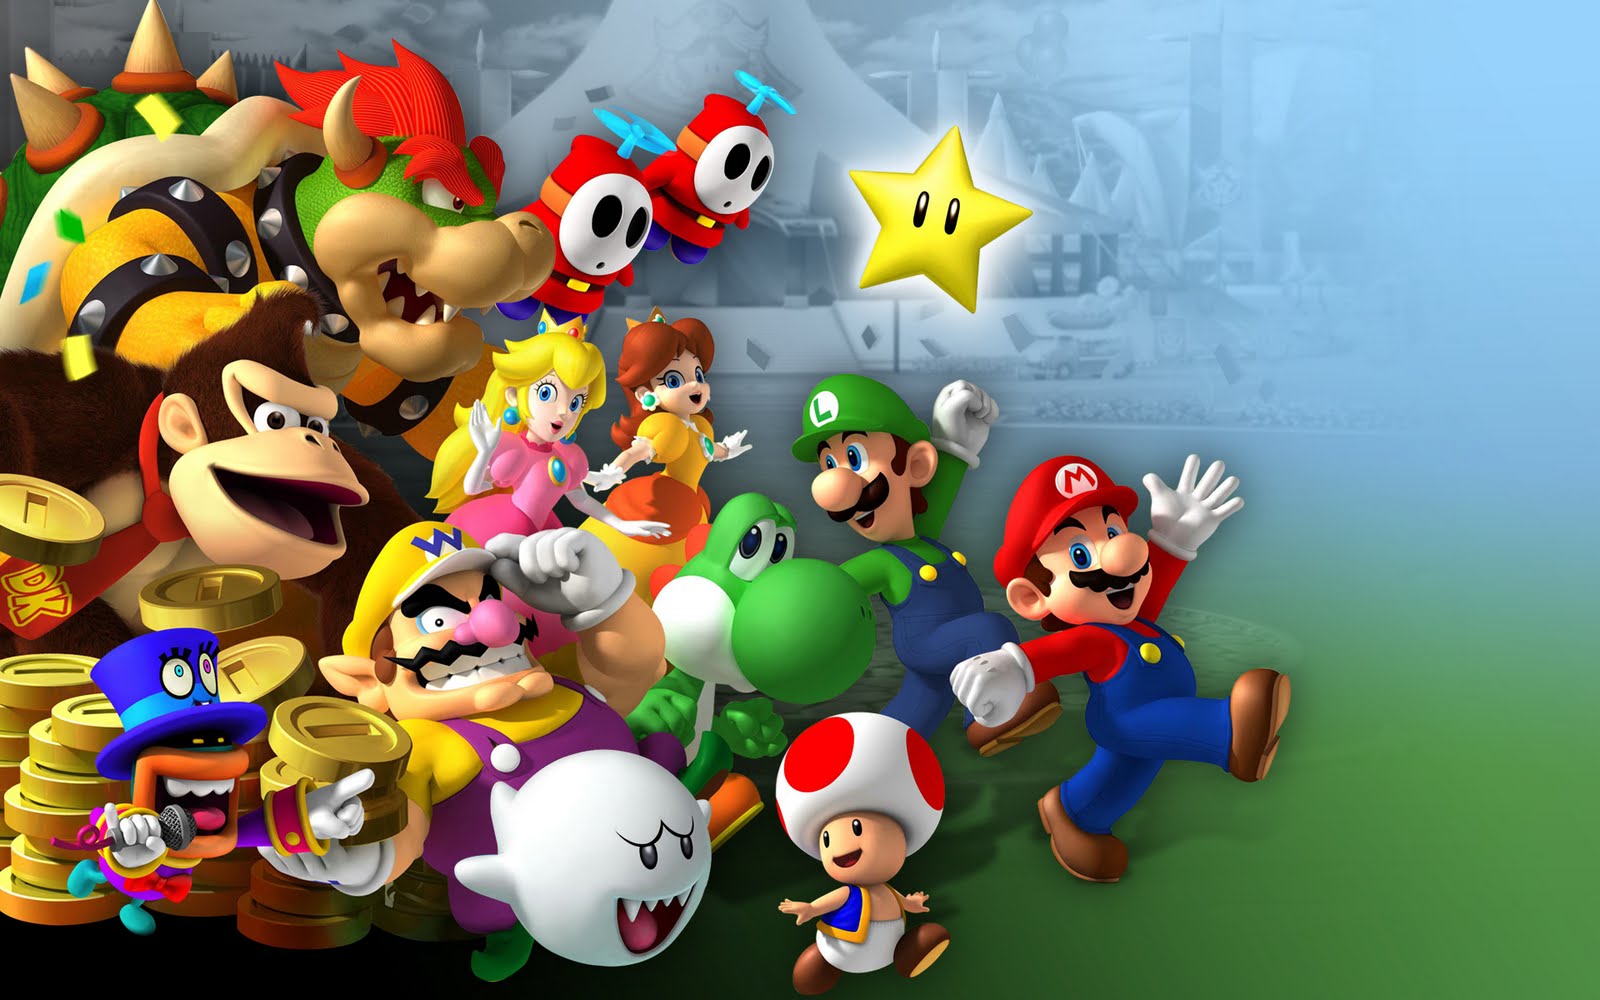 Nintendo Super Mario Bros With Many Characters Of The Game